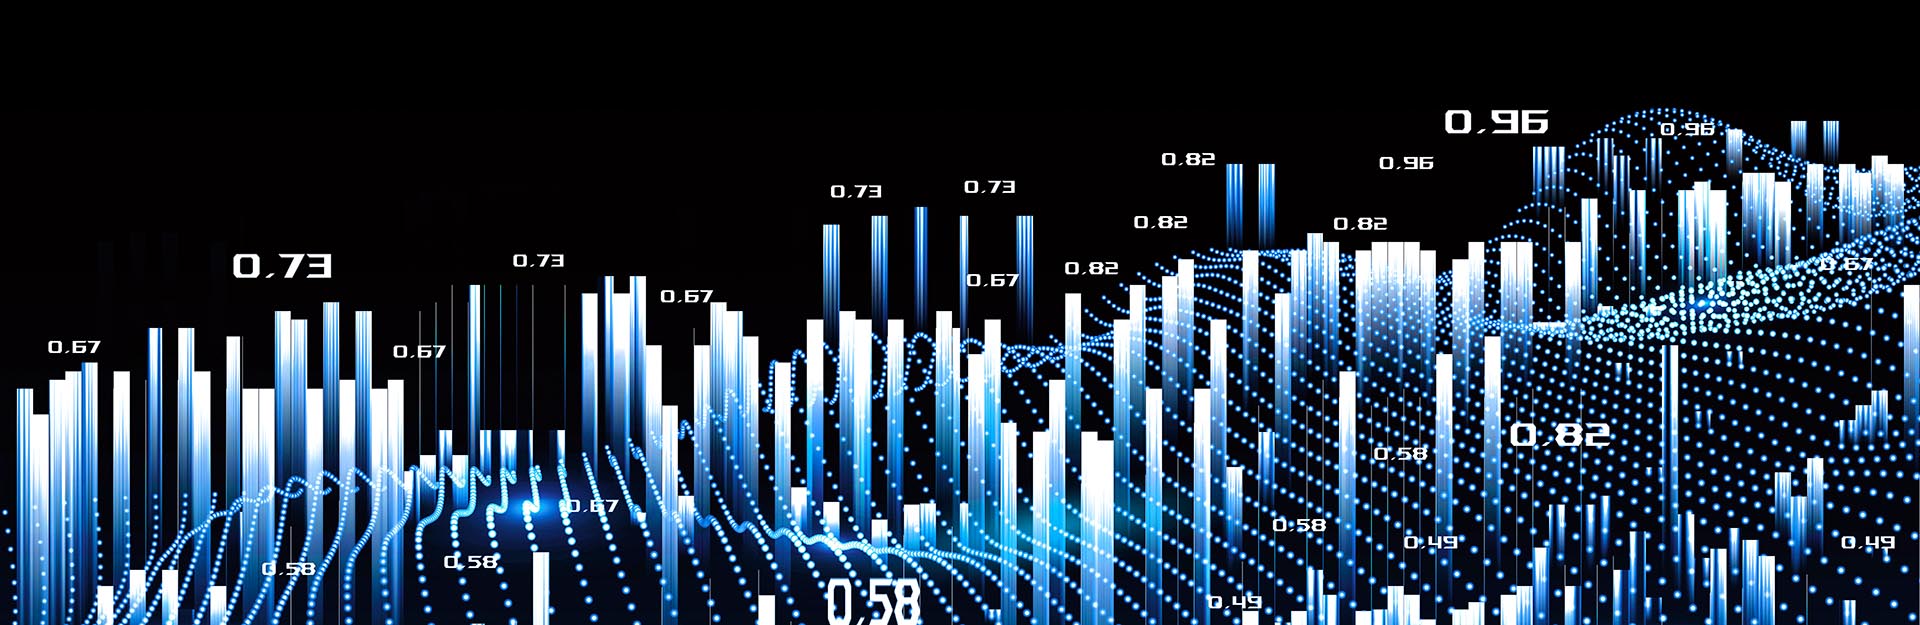 Decorative image of bar graphs and numbers.